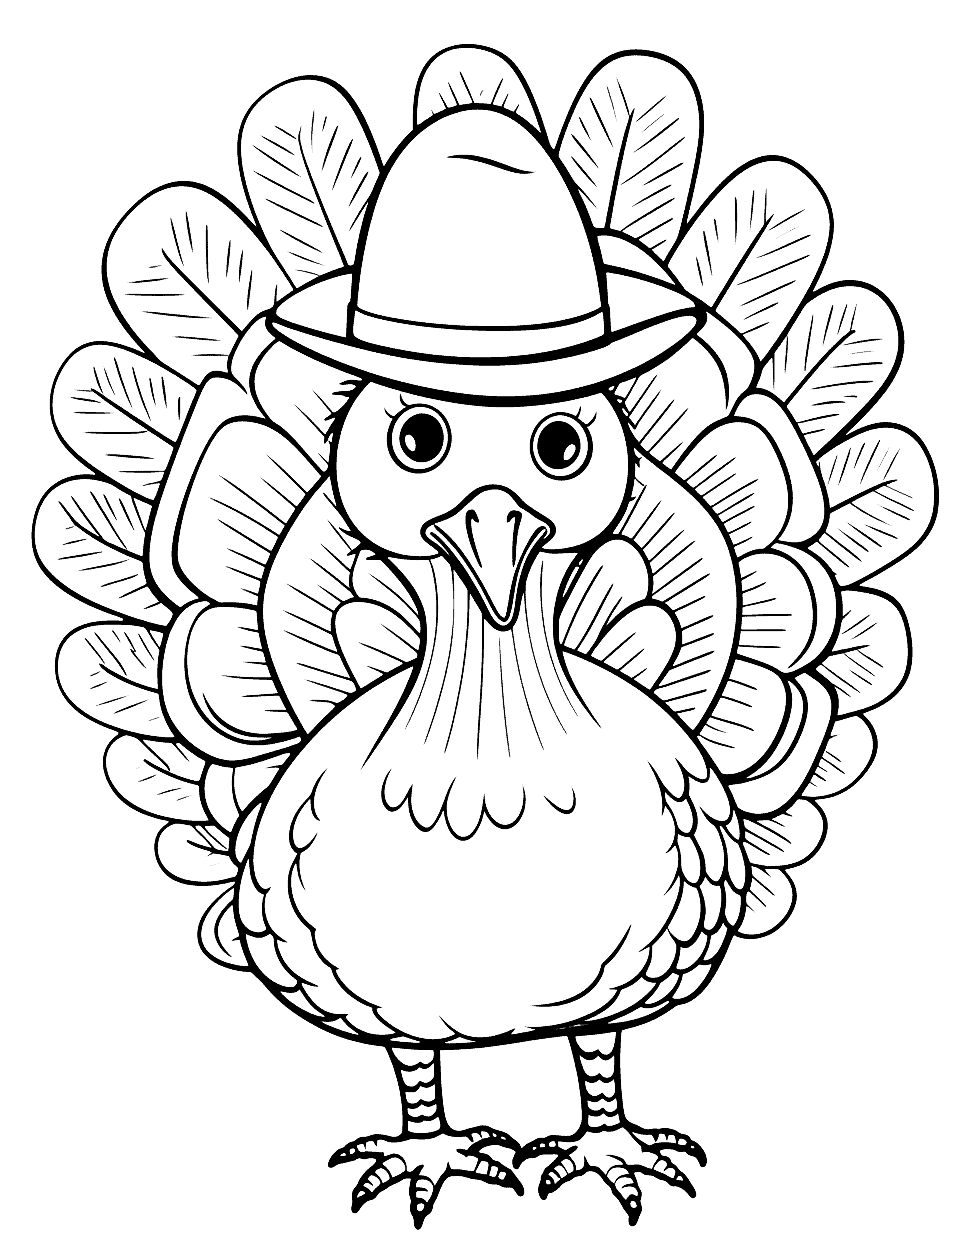 Turkey coloring pages free printable sheets